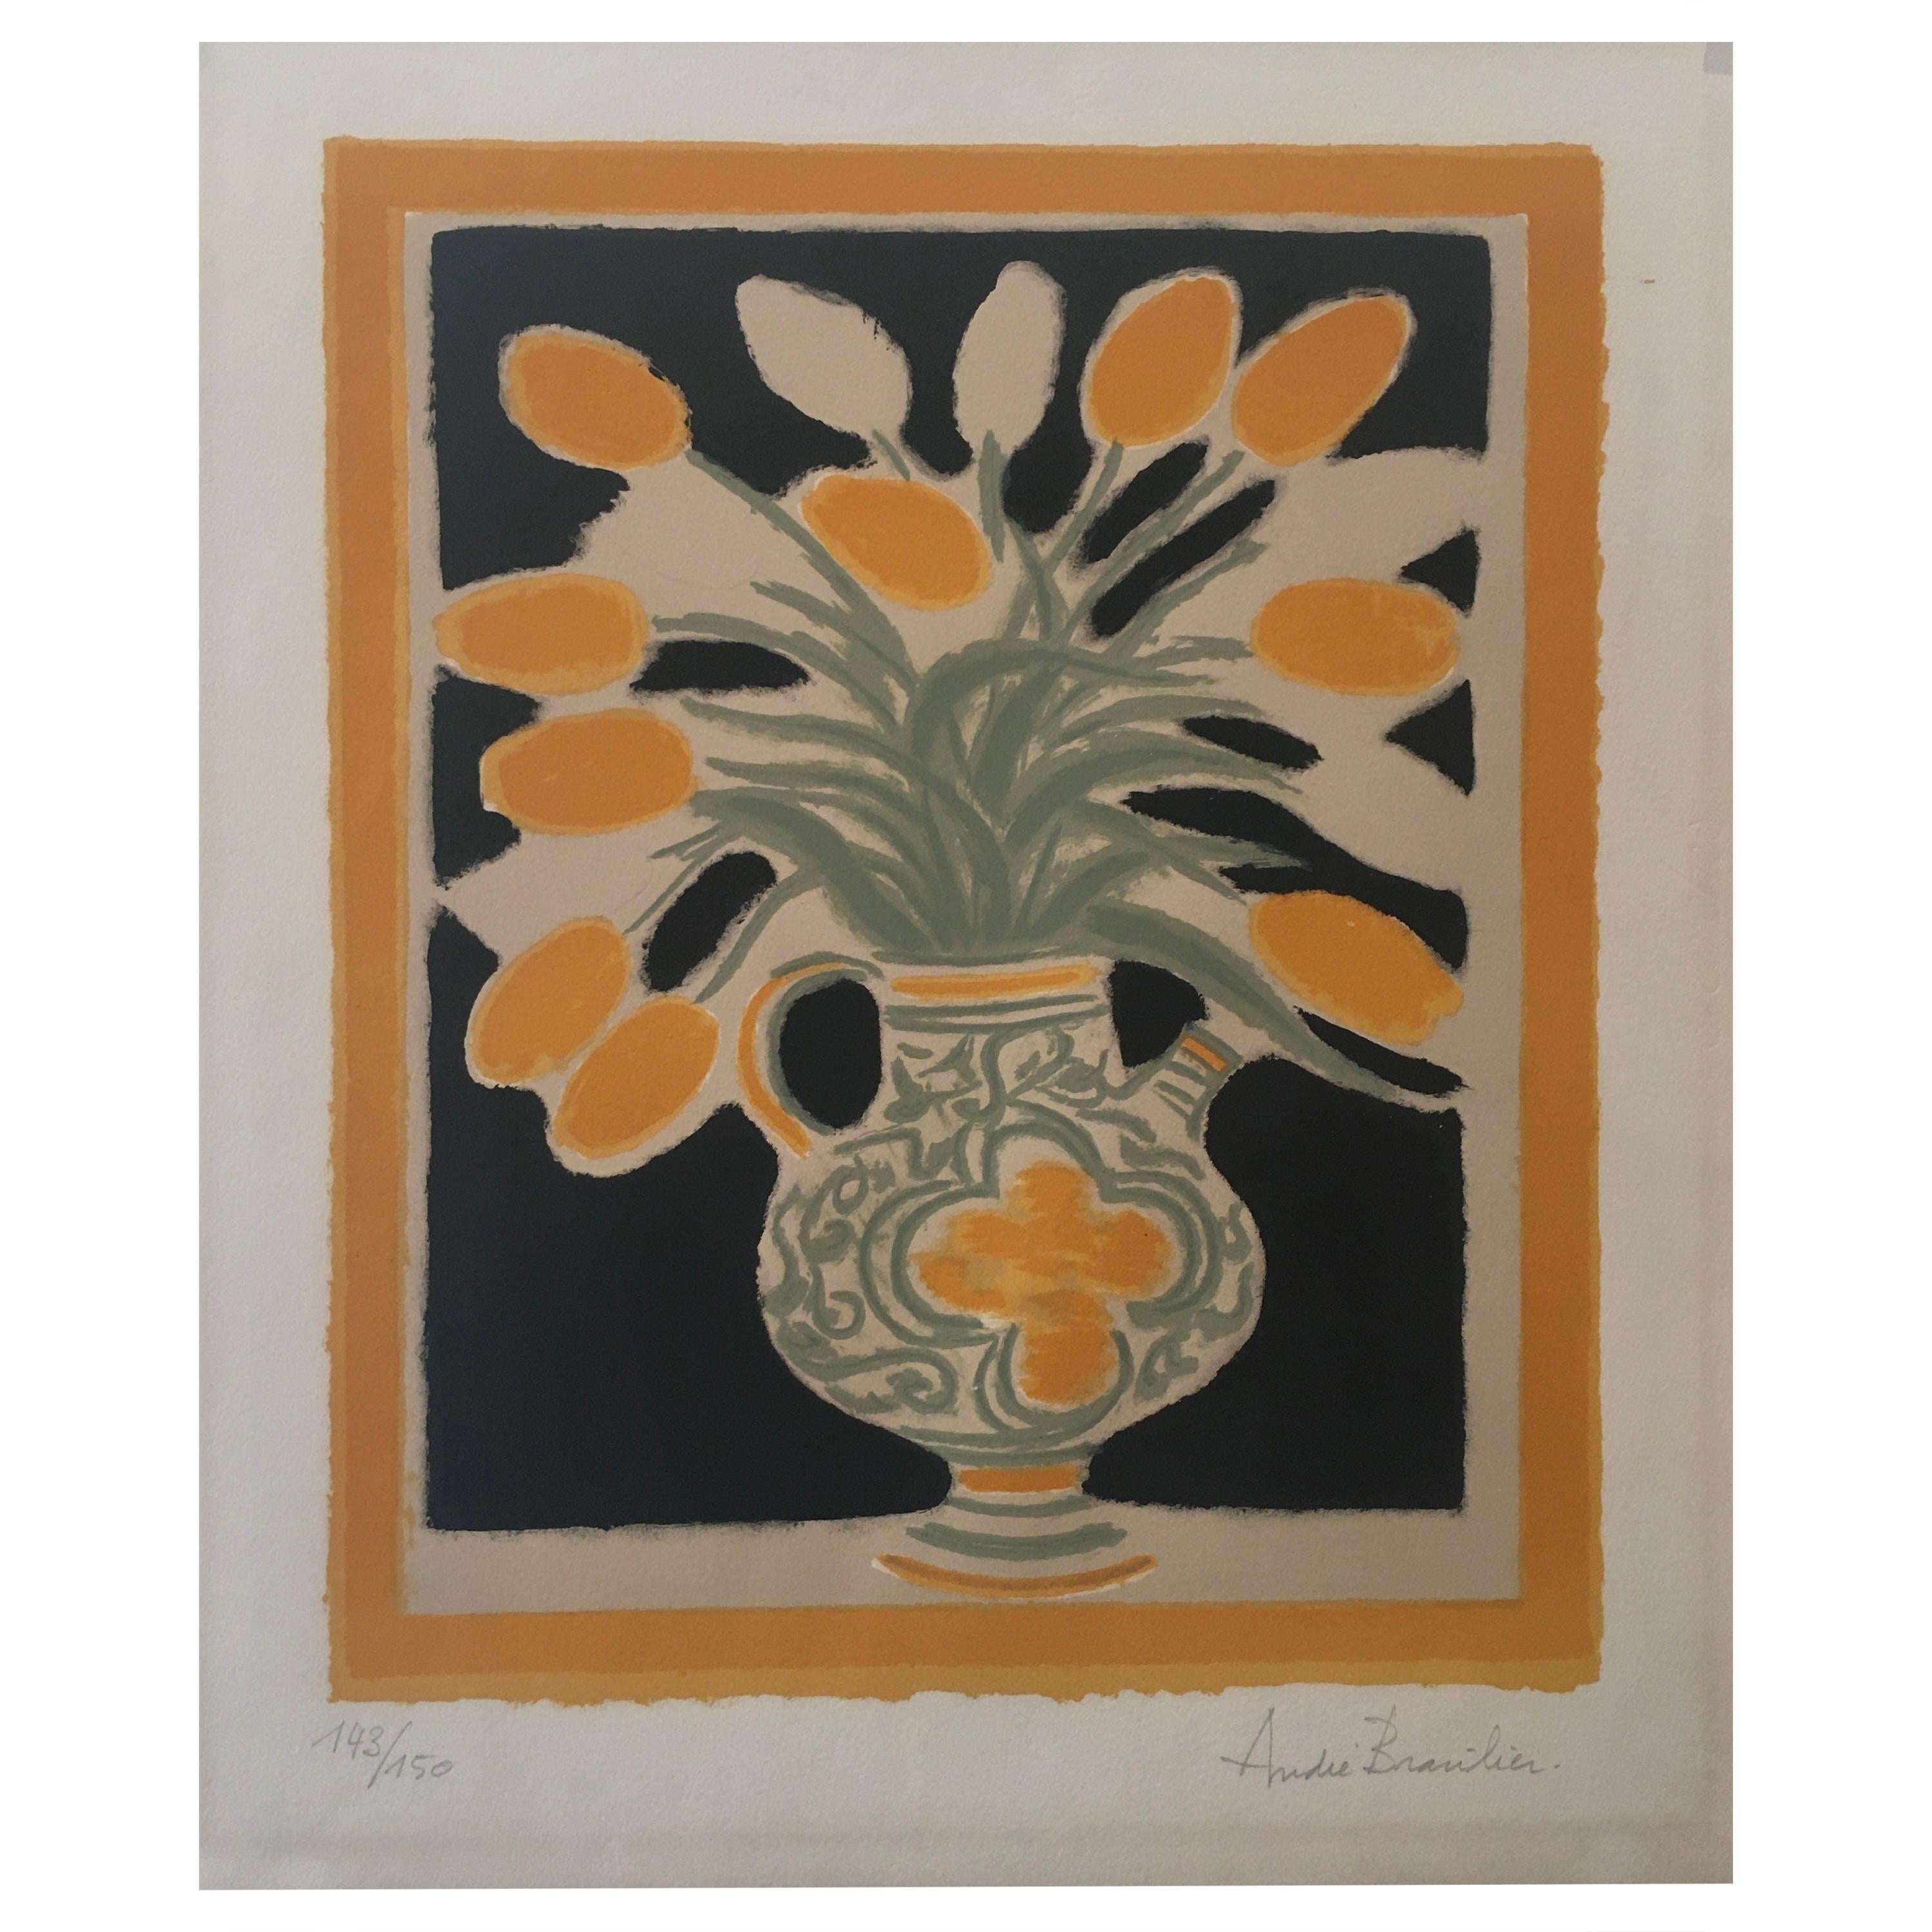 Original Poster by Andre Brasilier, 'The Italian Vase' Signed & Numbered